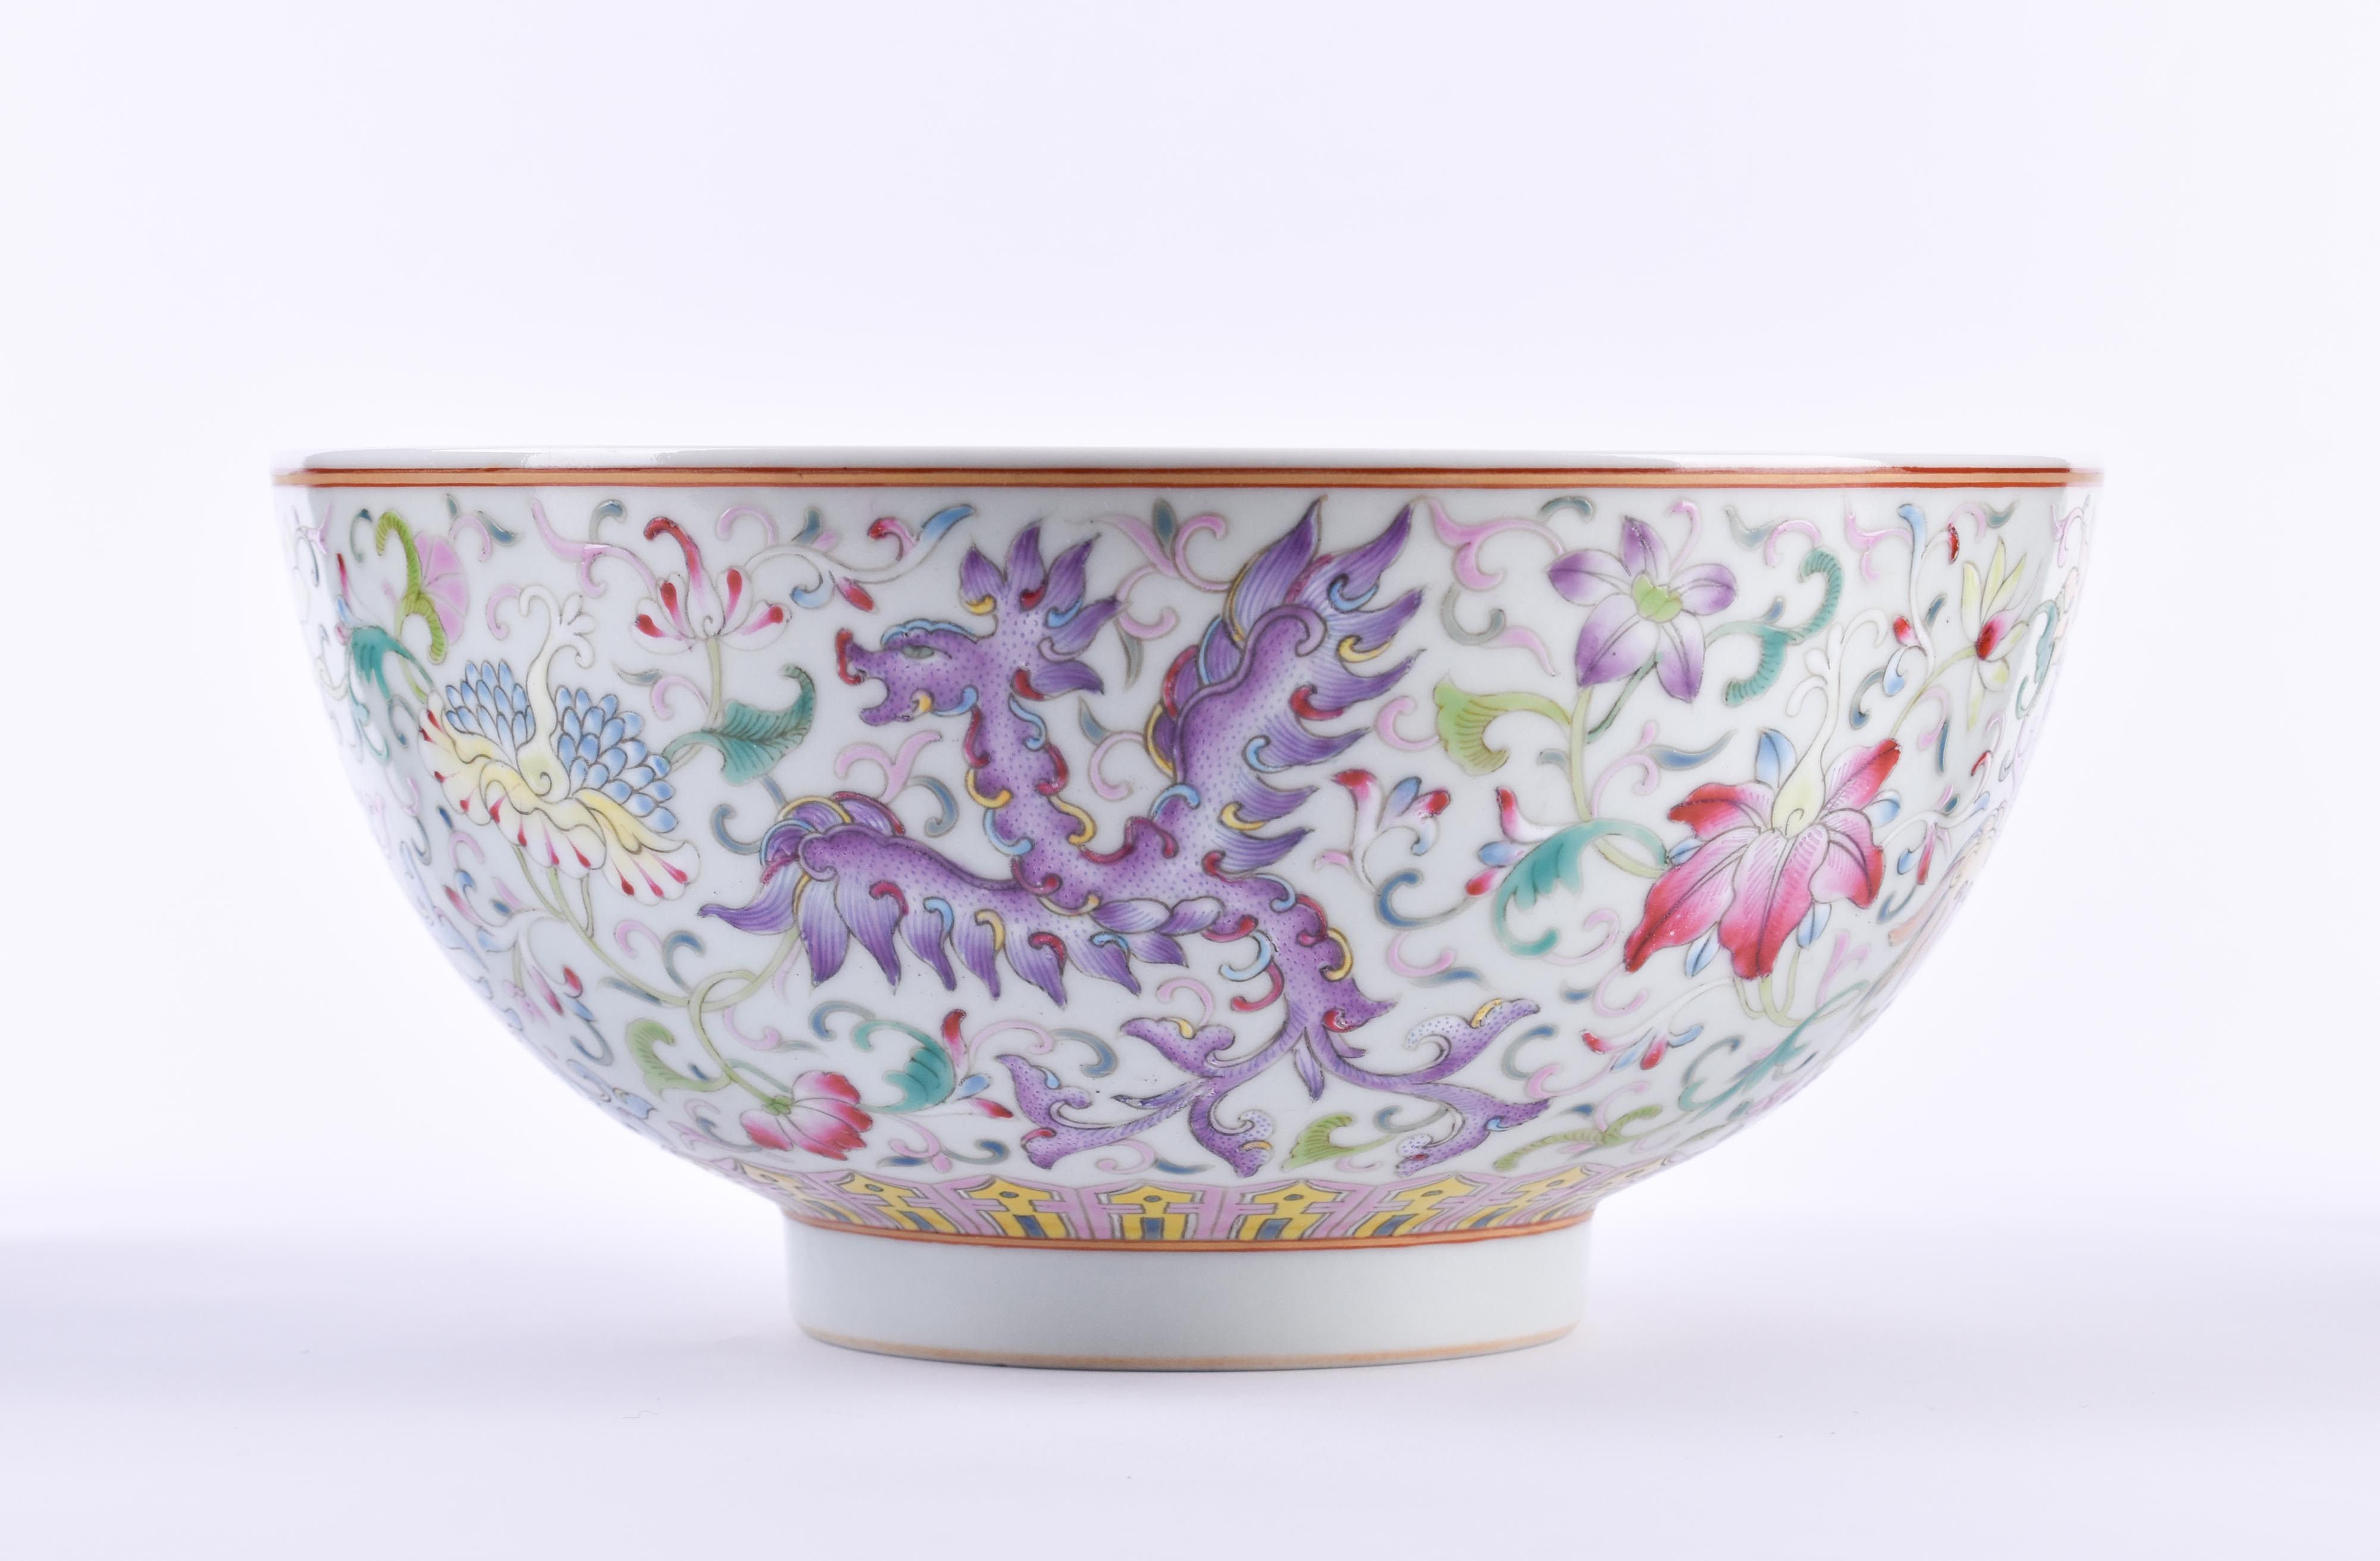  Famille Rose bowl China Qing dynasty - Image 5 of 10